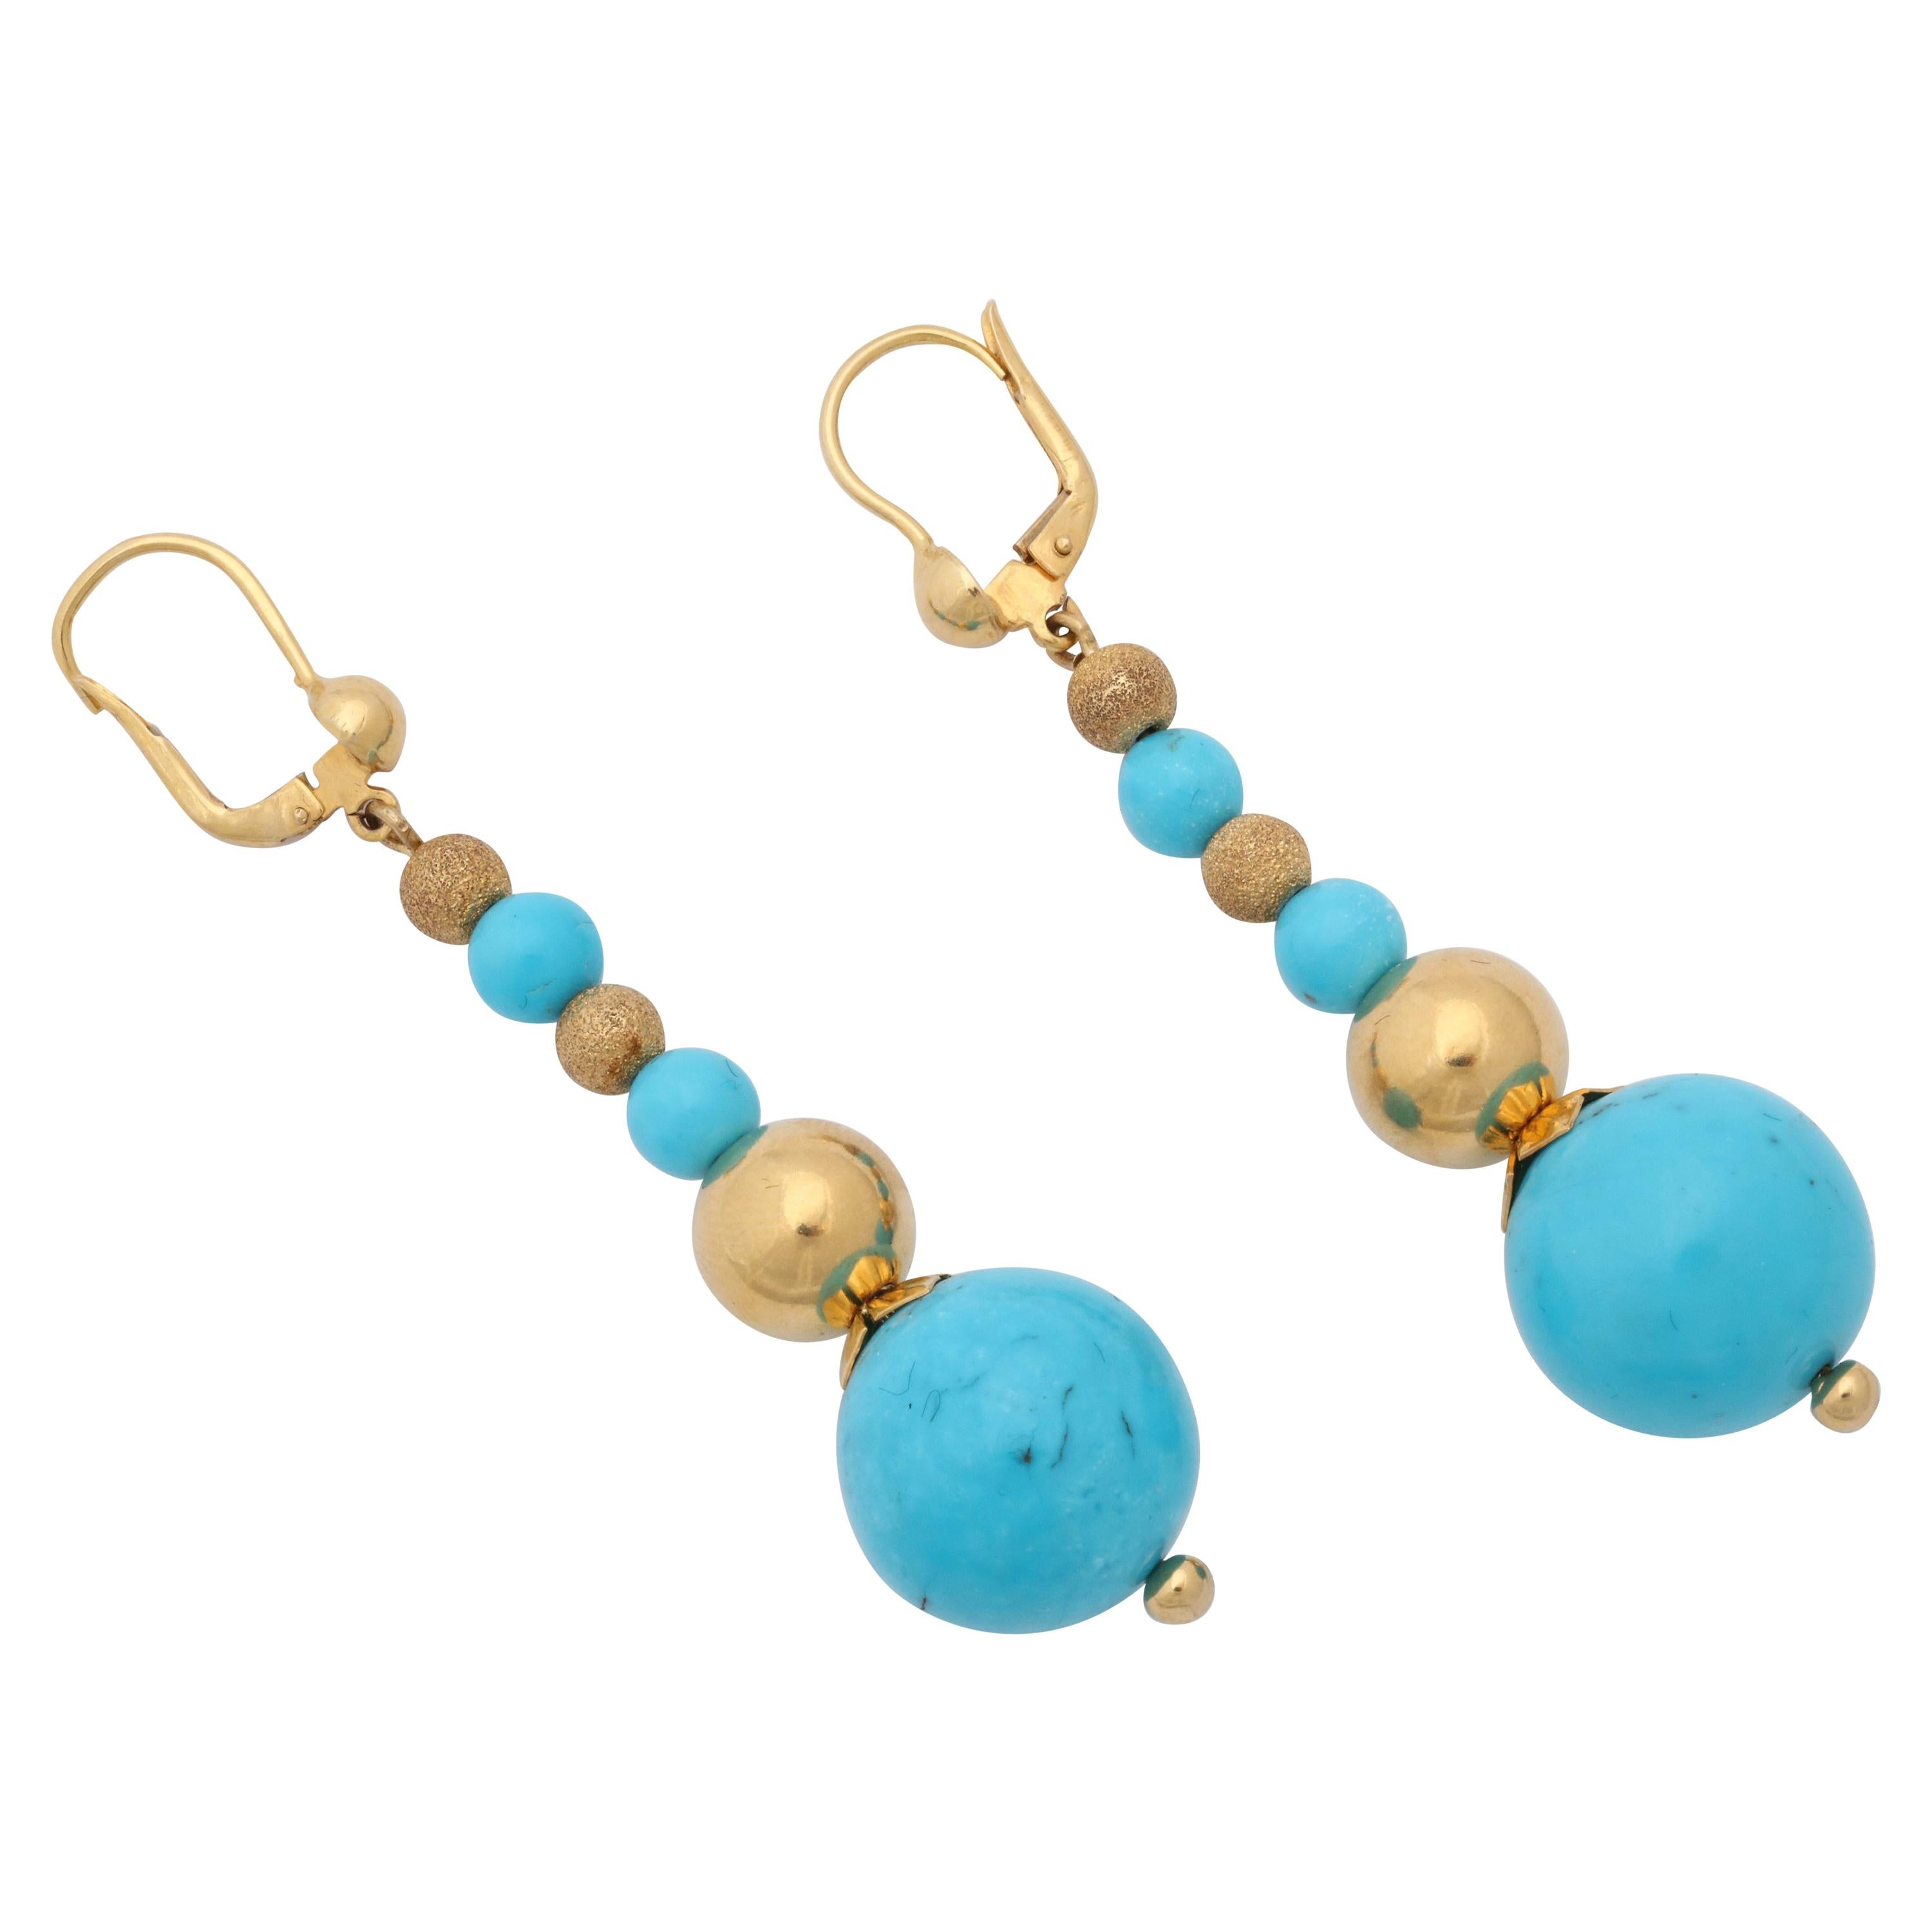 1980s Italian Turquoise Ball with Sparkly and High Polish Ball Earrings For Sale